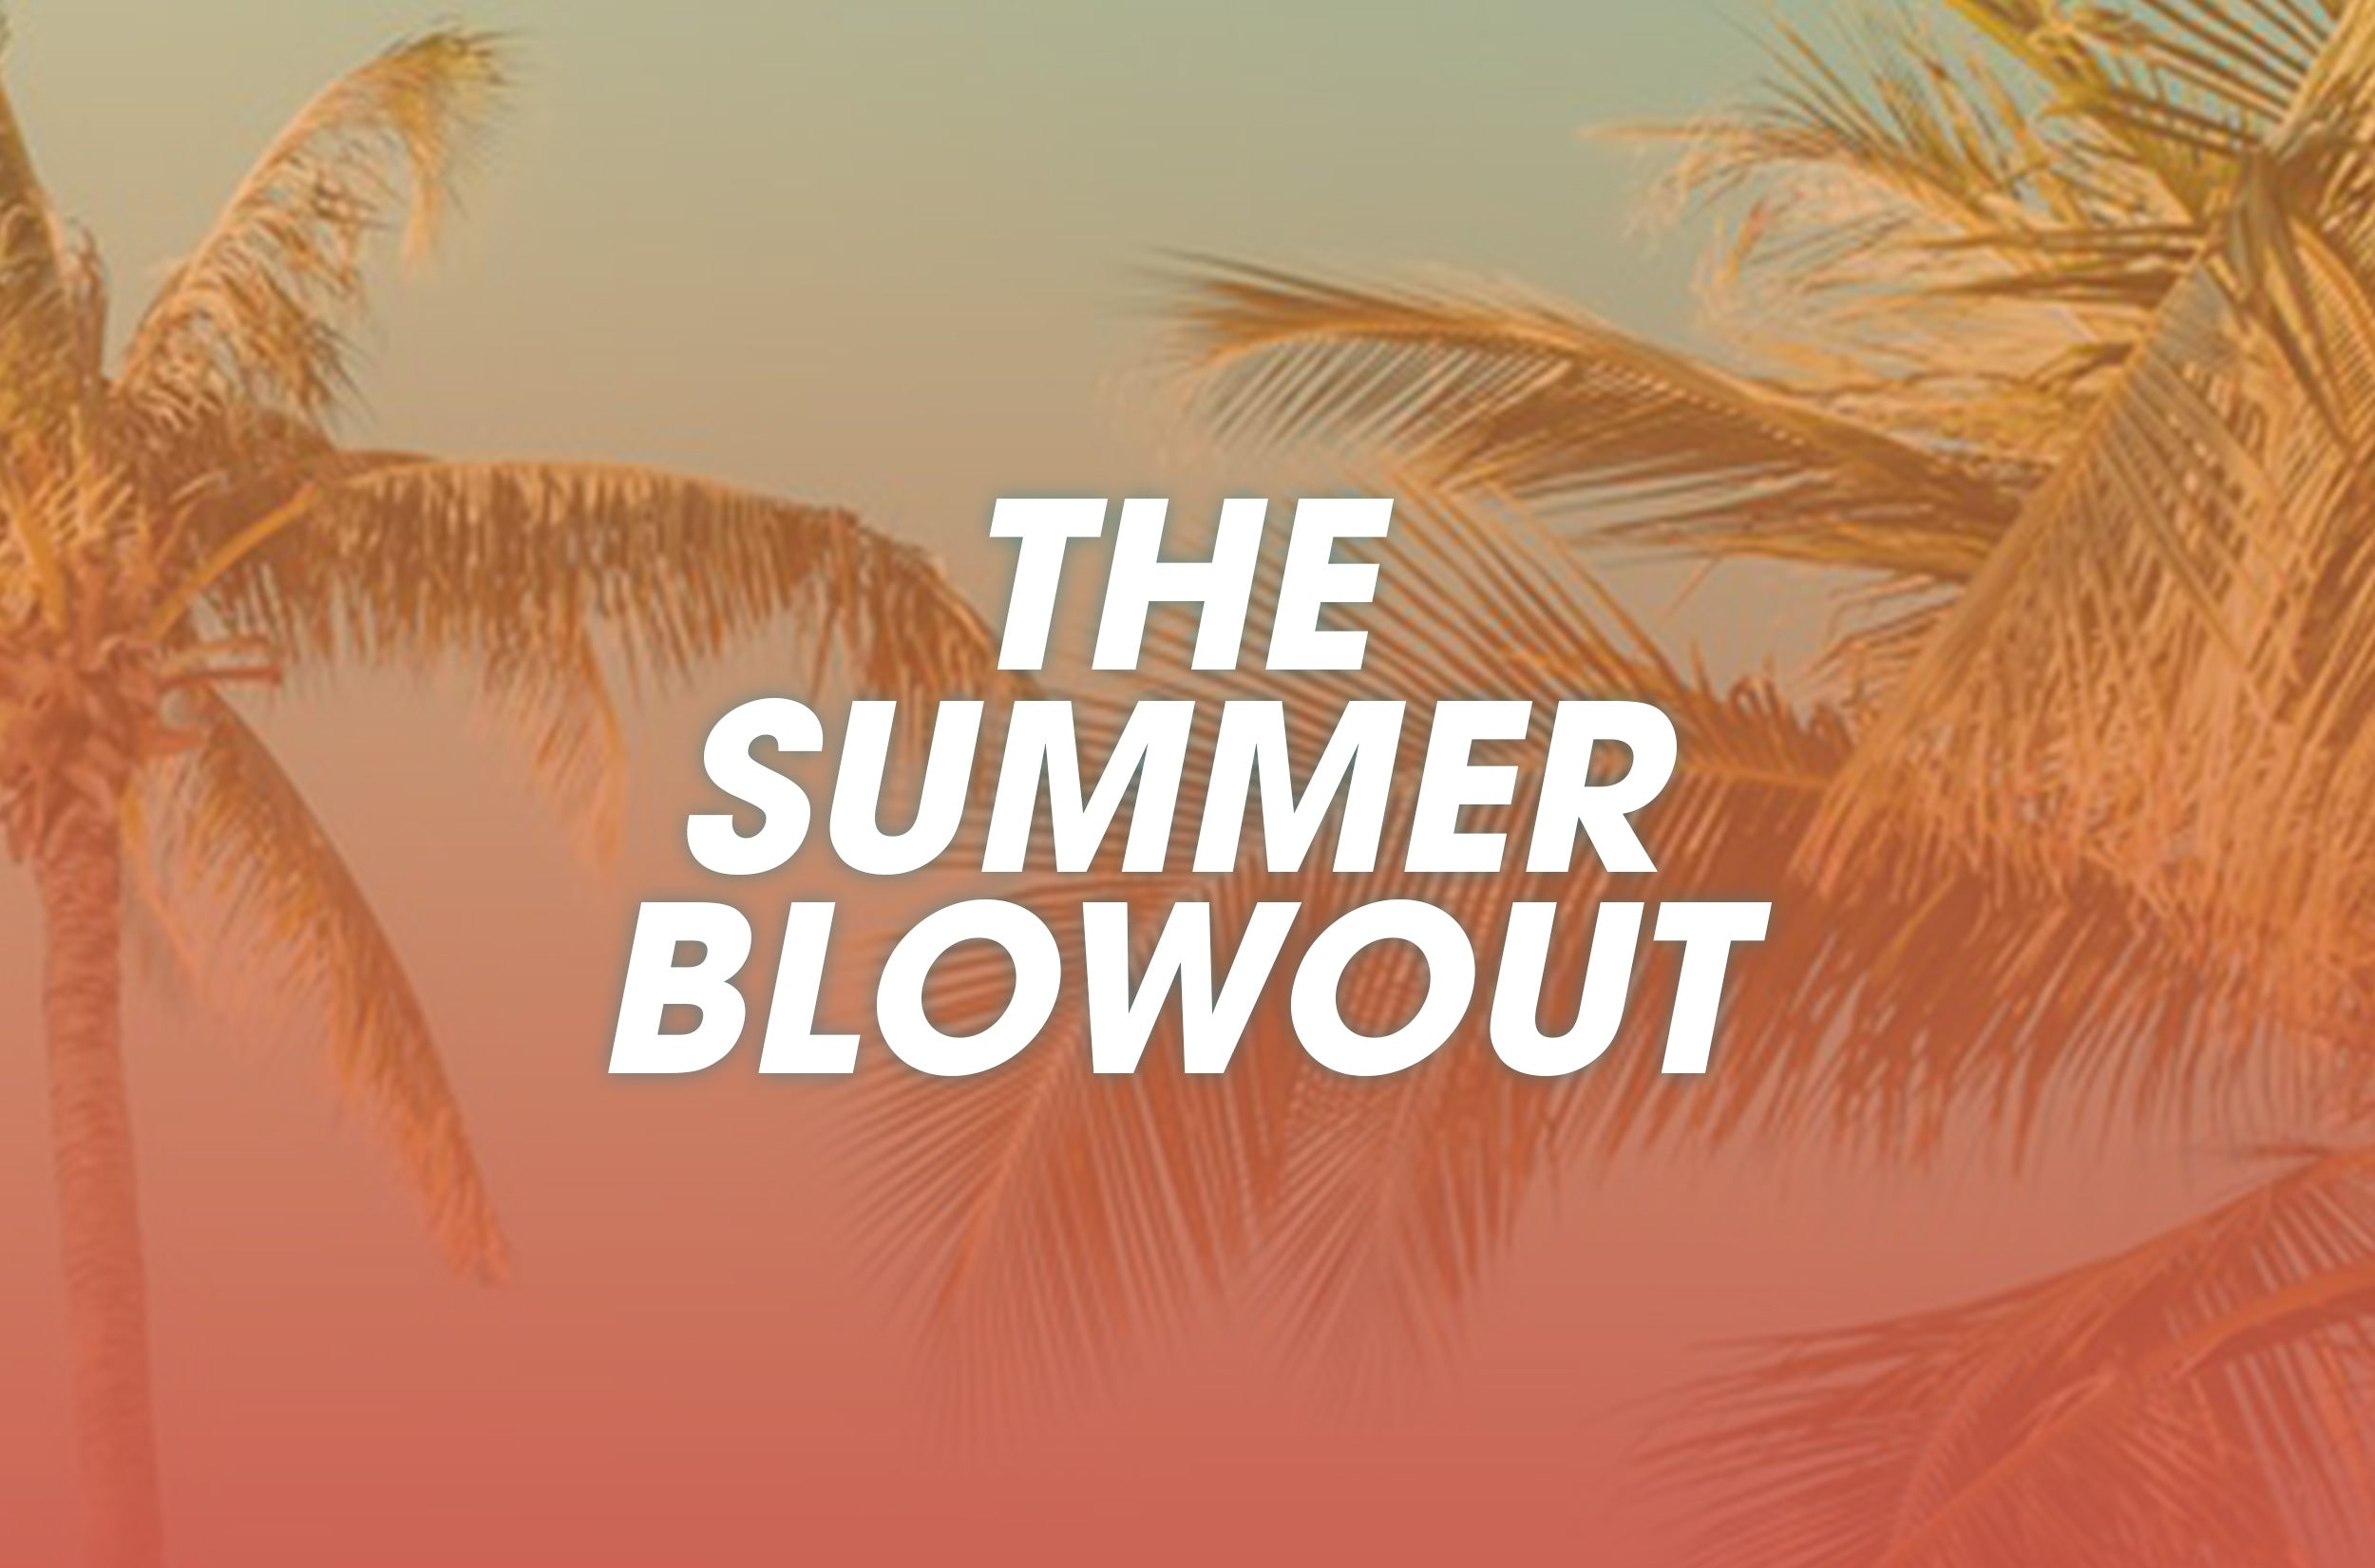 THE SUMMER BLOWOUT: THIS THURSDAY